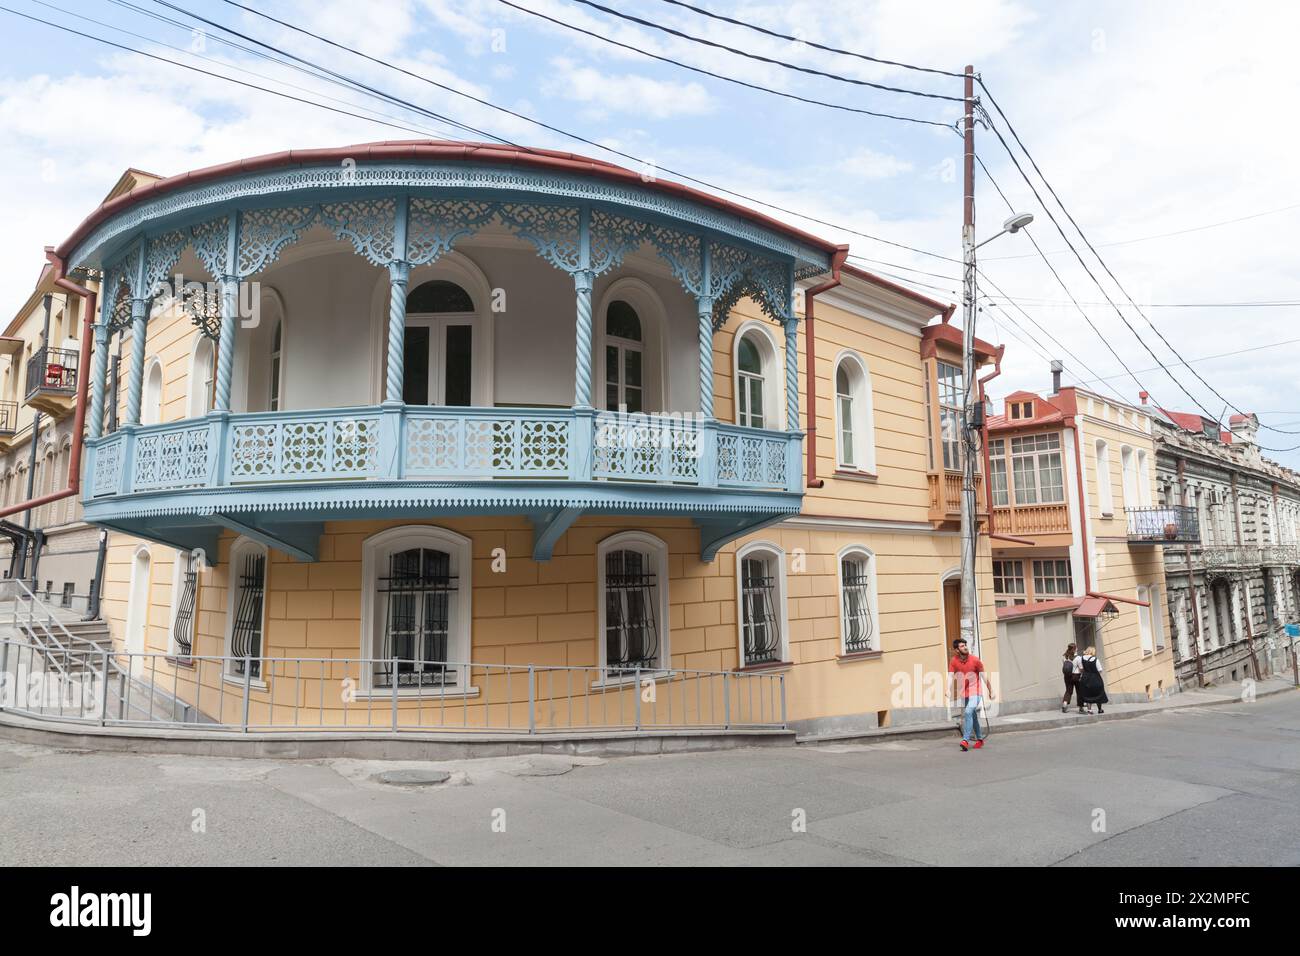 Tbilisi, Georgia - May 3, 2019: Tbilisi street view with people walking near old residential houses with balconies Stock Photo